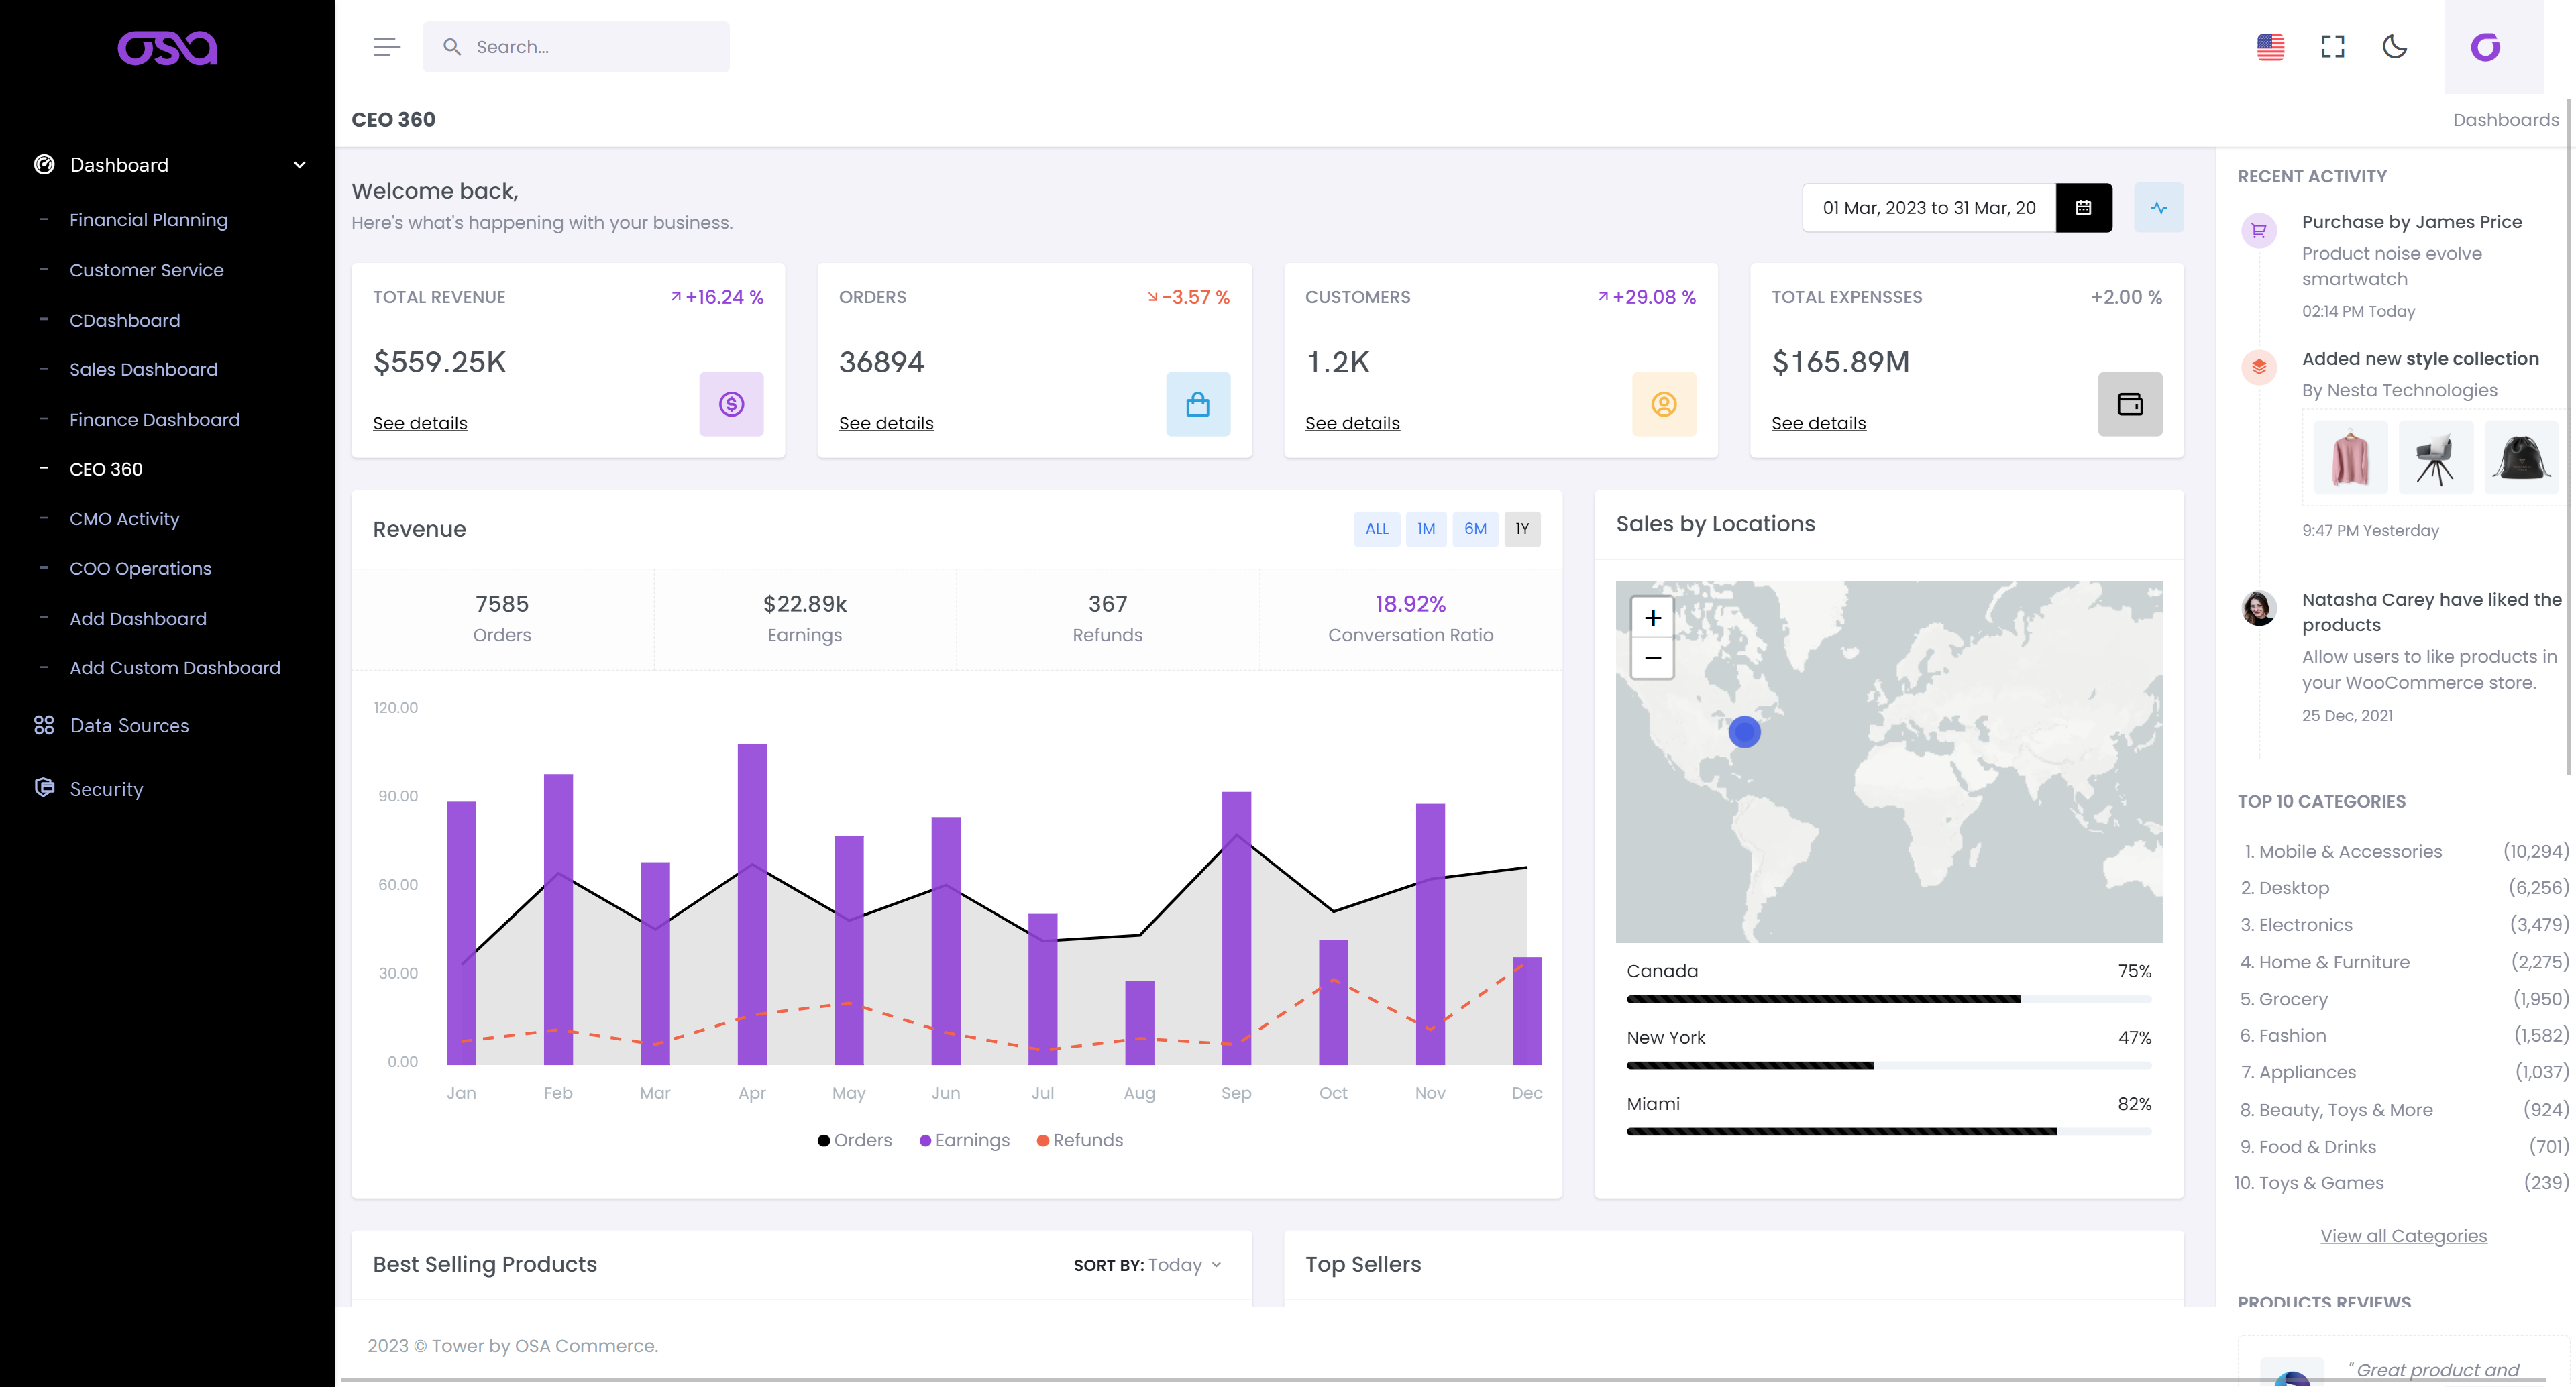 Osa Collaborative Visibility Platform Offers C-level executives the ability to see your entire supply chain operations from a single dashboard. Includes financial planning, customer service, Sales, CMO activity, COO operations, and more.